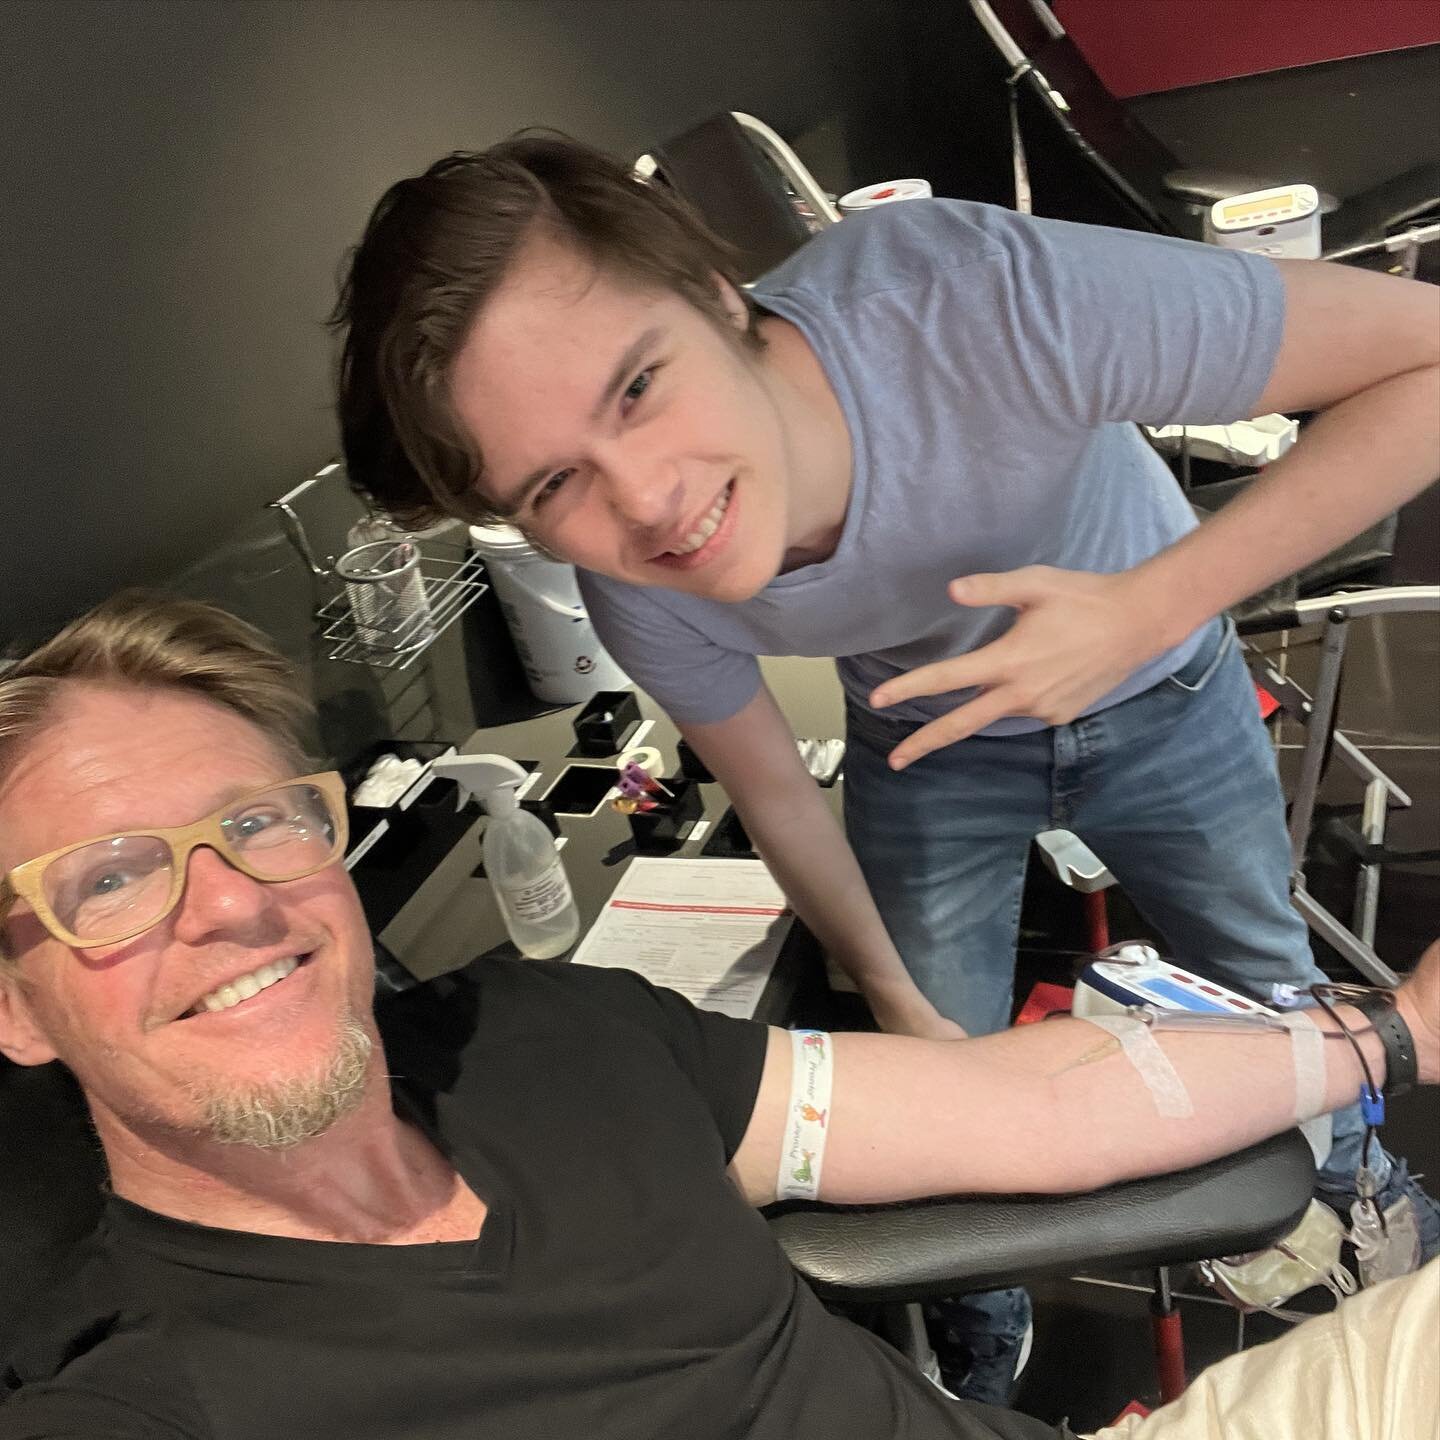 Father and son-time at WP Blood Services. Shoutout to the amazing team at @thewcbs for their professional, friendly and tireless work. Here&rsquo;s to another generation of blood donators. 
.
.
#journal 
#peace
#coolestblooddonorever